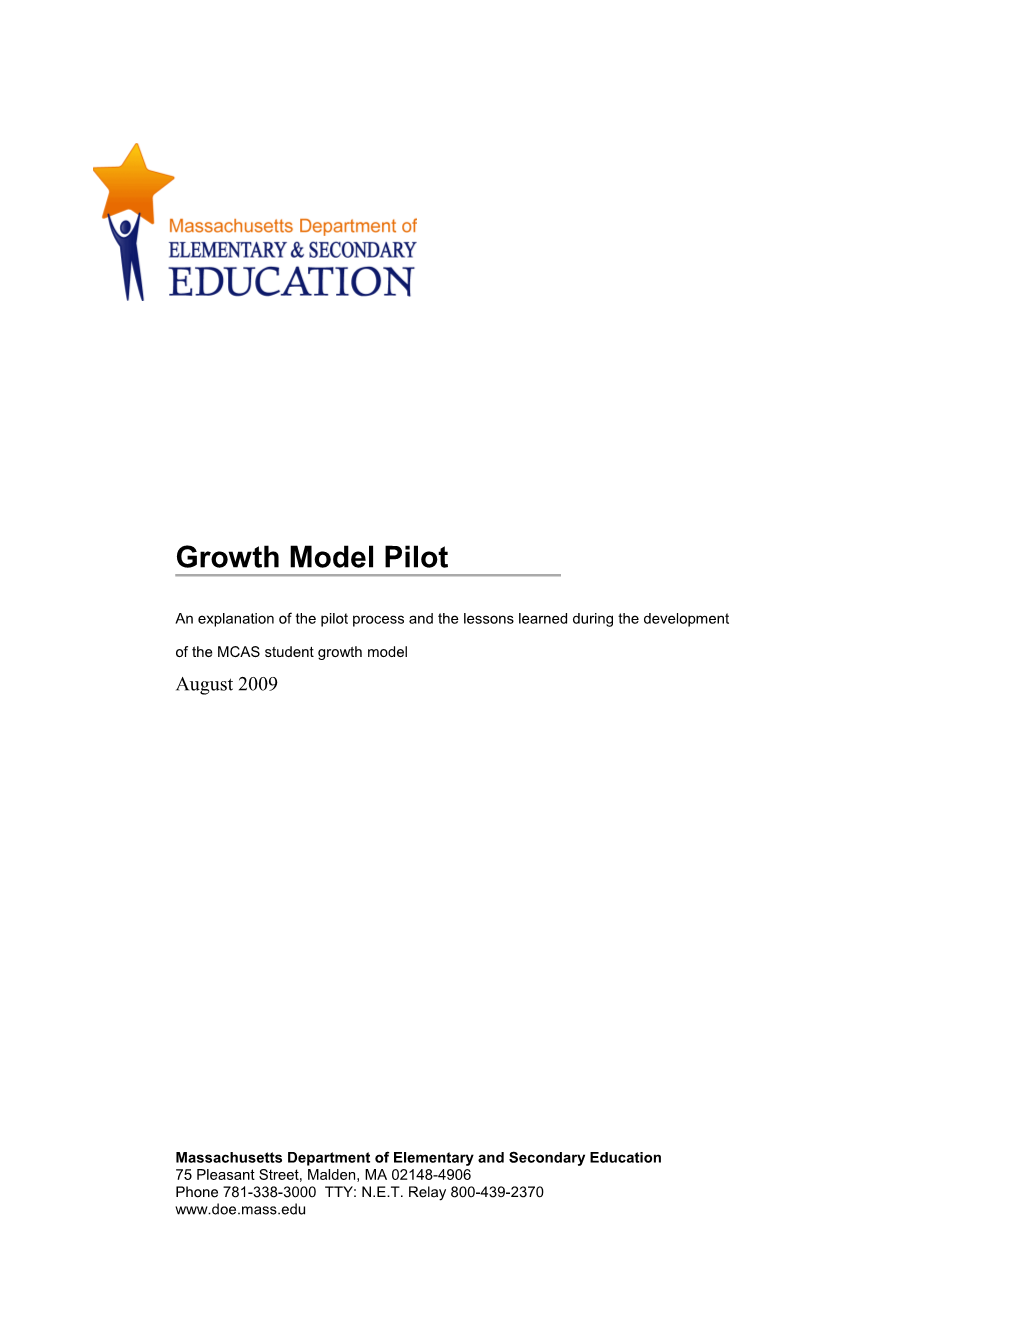 An Explanation Of The Pilot Process And The Lessons Learned During The Development Of The MCAS Student Growth Model